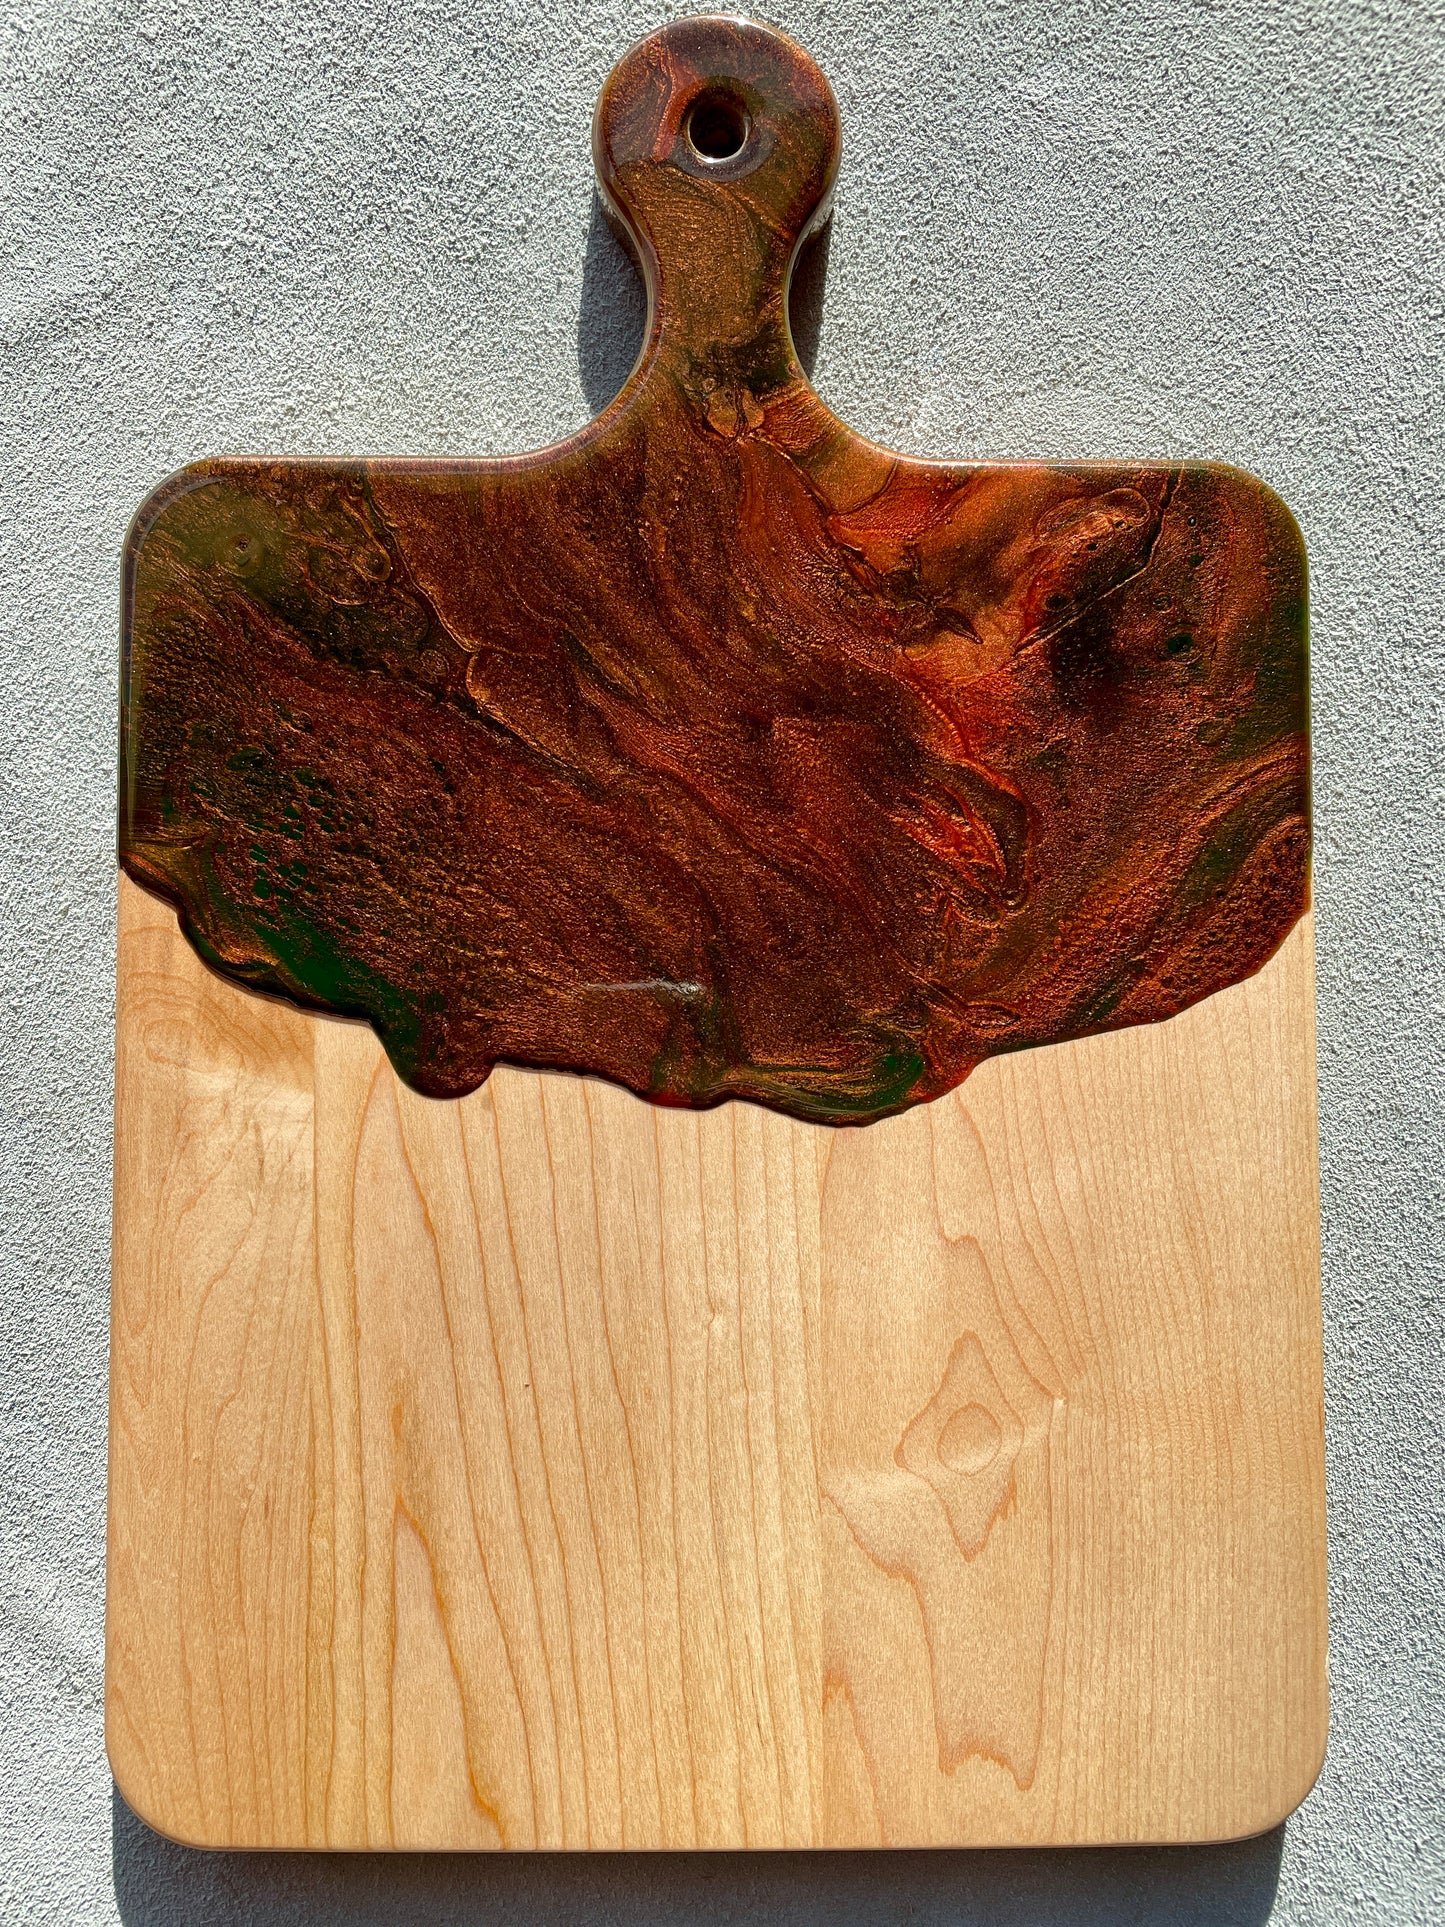 Artisan Rounded Cheese Board / Handle